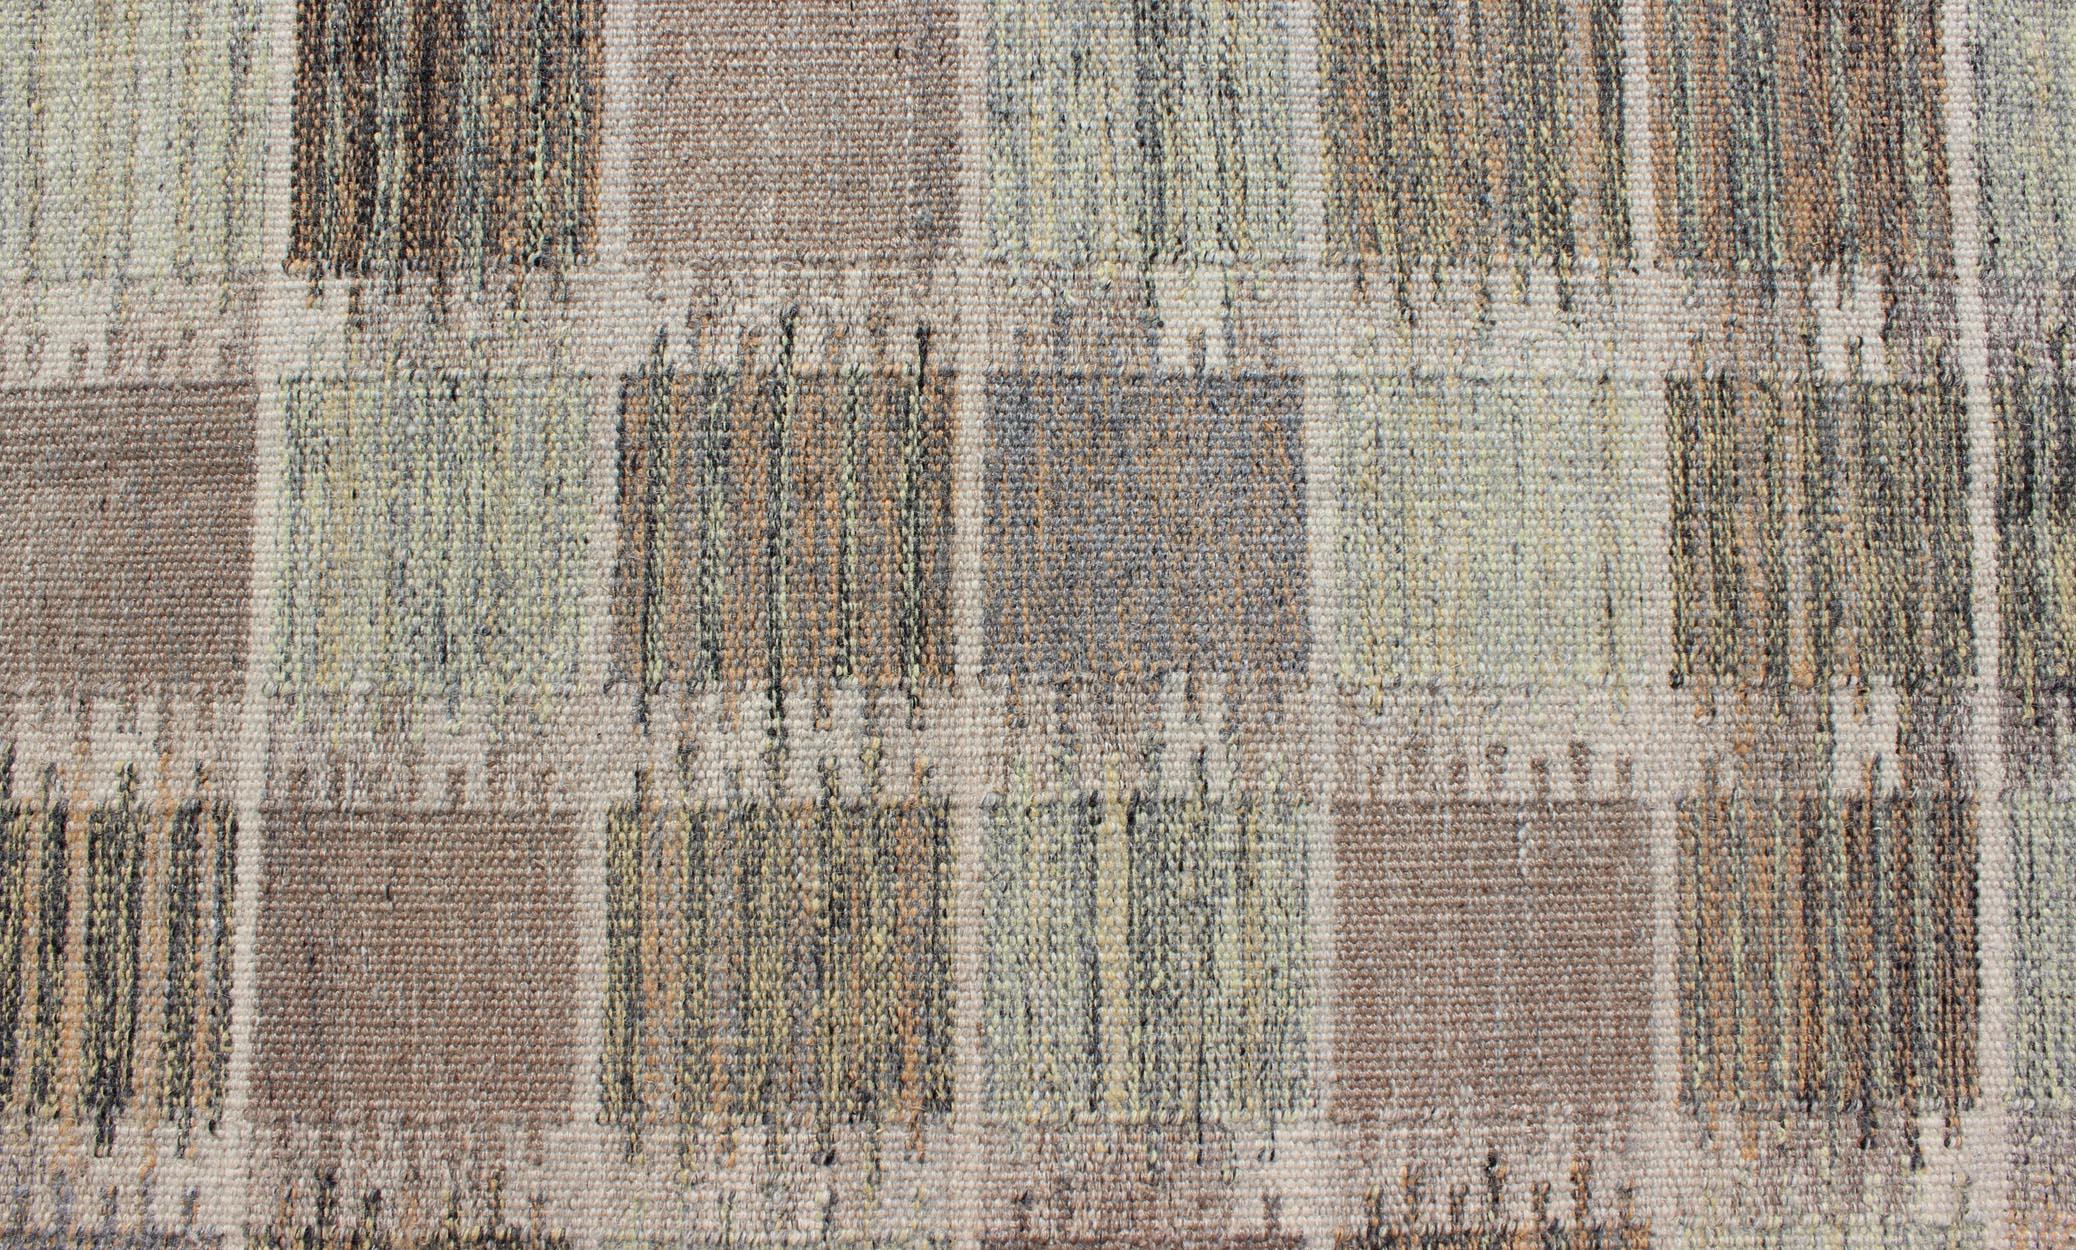 Modern Checkerboard or Patchwork Scandinavian Flat Weave Rug in Neutral Colors In Excellent Condition For Sale In Atlanta, GA